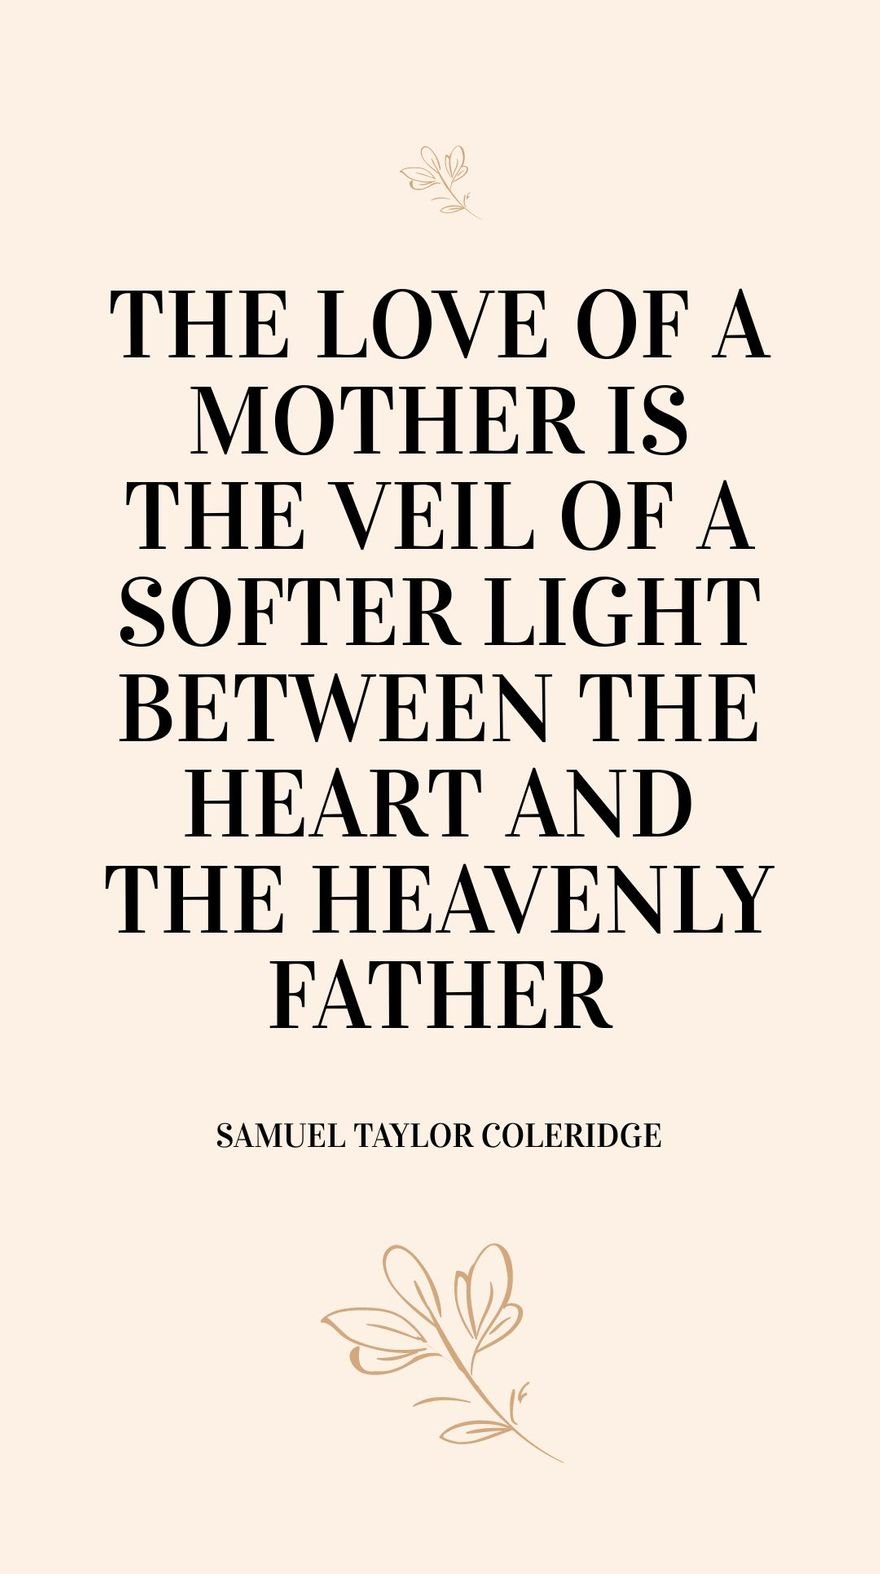 Samuel Taylor Coleridge - The love of a mother is the veil of a softer light between the heart and the heavenly Father. in JPG